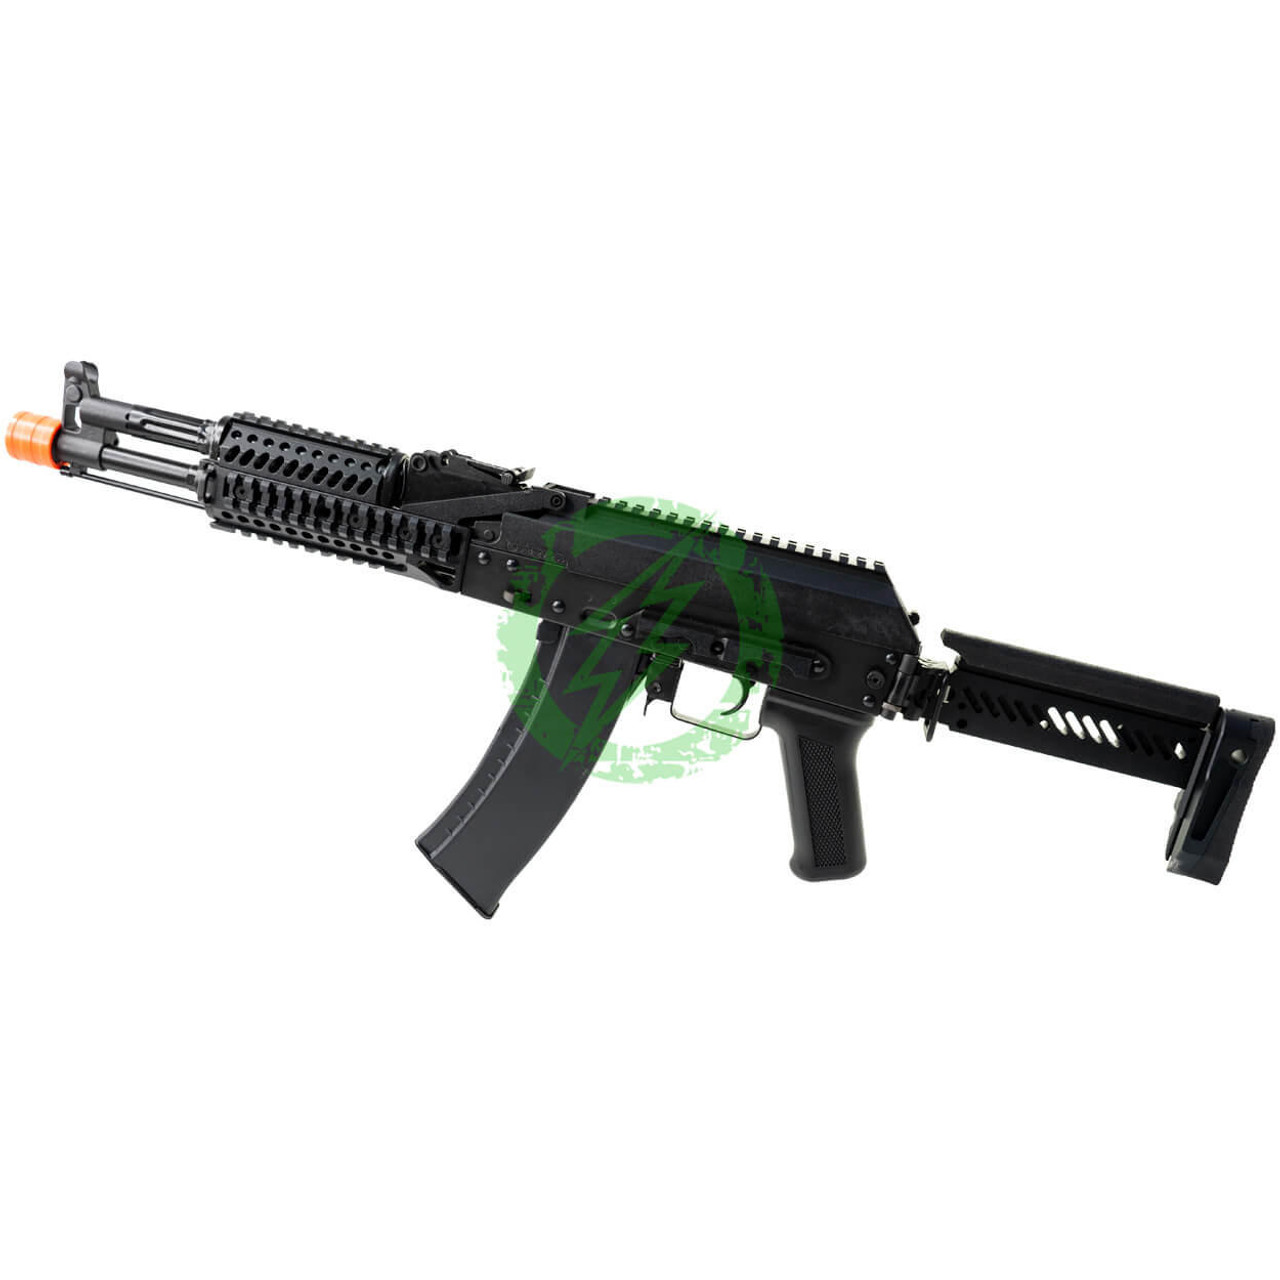  LCT ZK-104 Stamped Steel ZK Series AK Airsoft AEG Rifle 